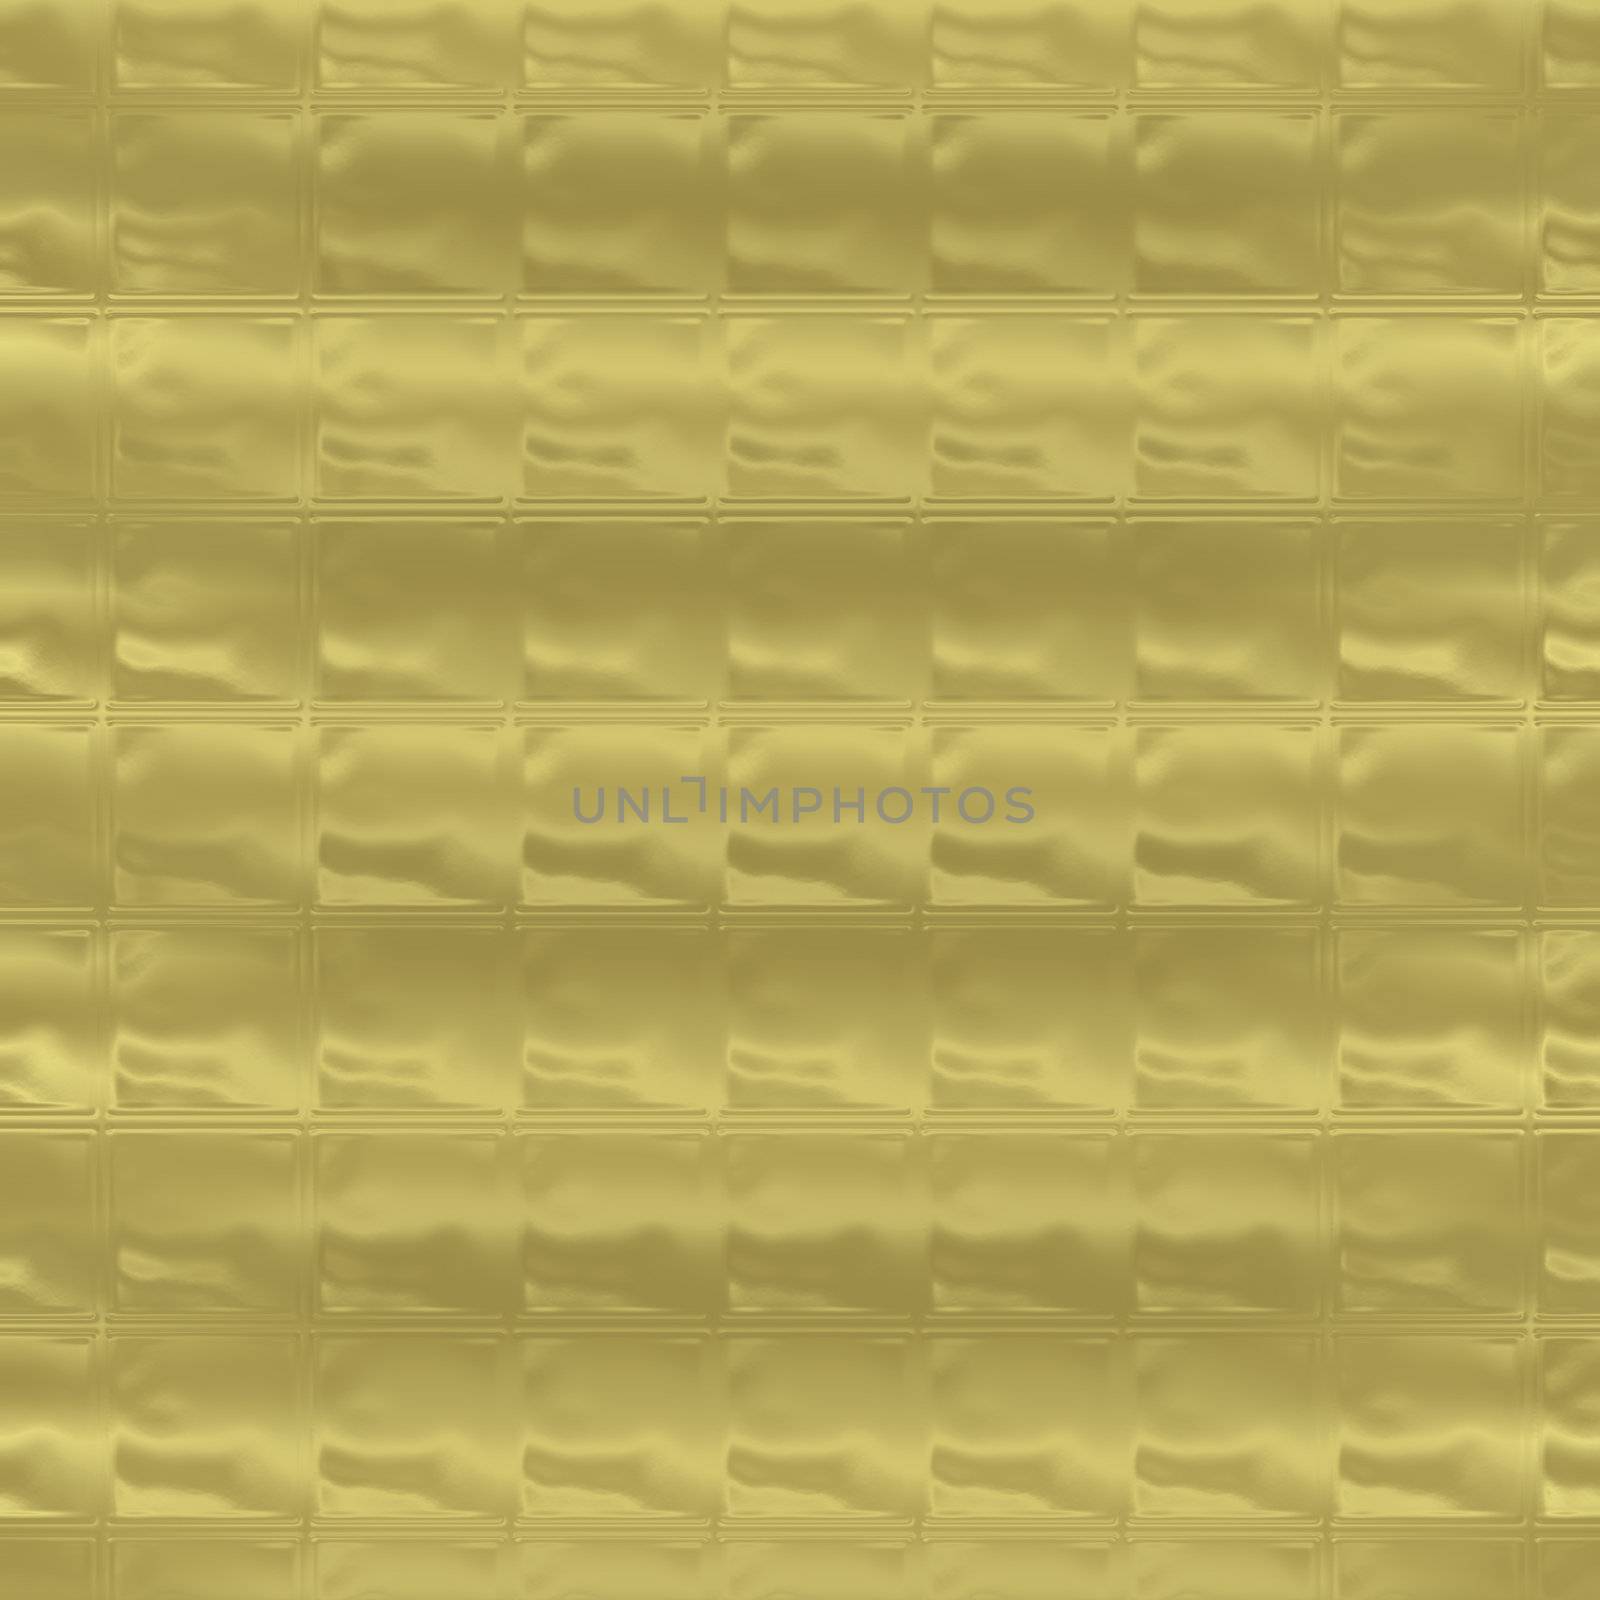 golden background tile with glass block look